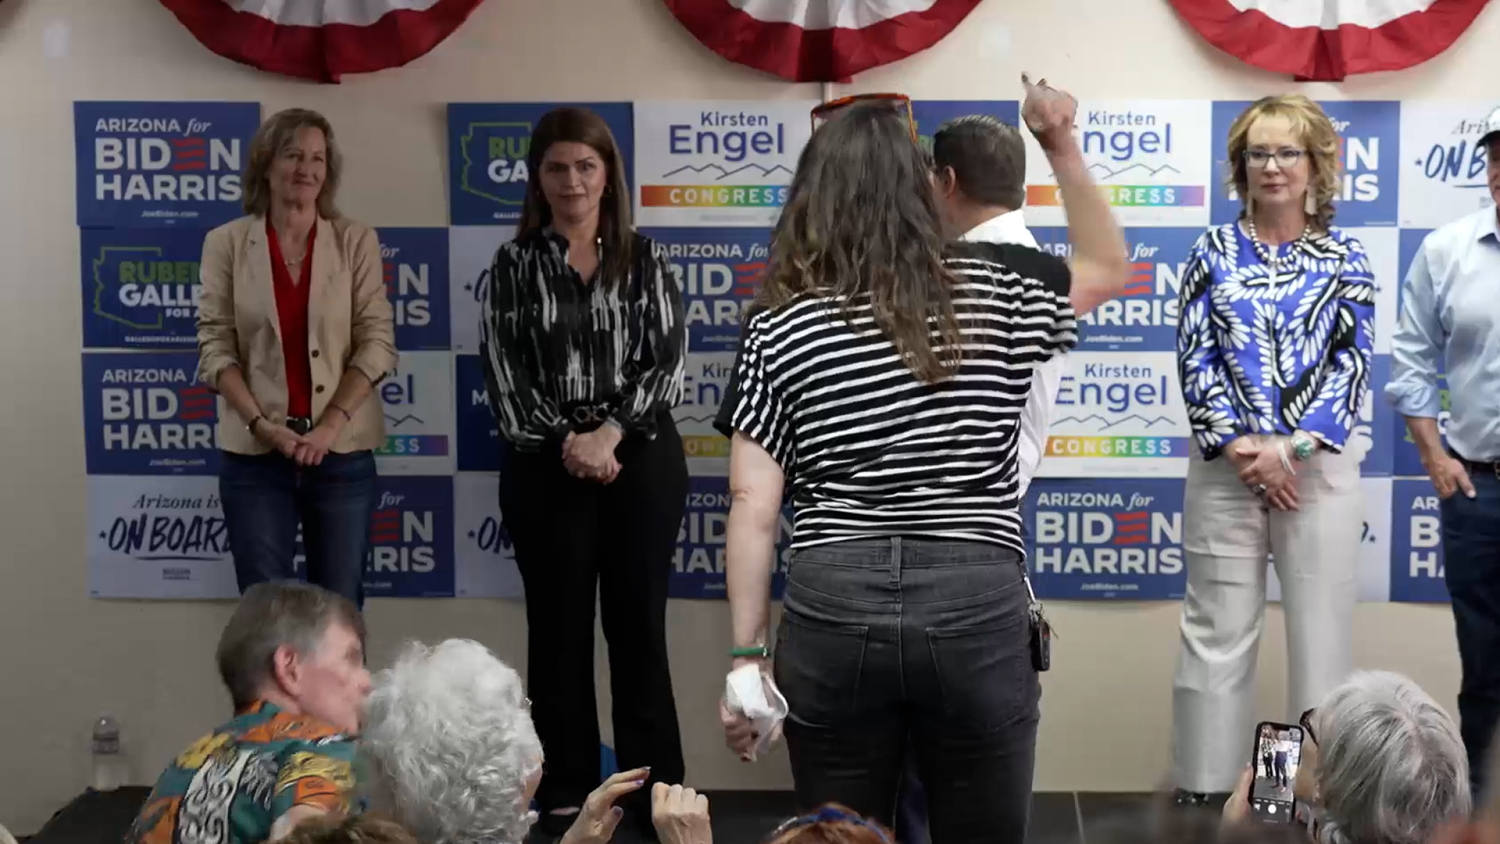 Arizona Democrats field office opening interrupted by Pro-Palestinian protesters